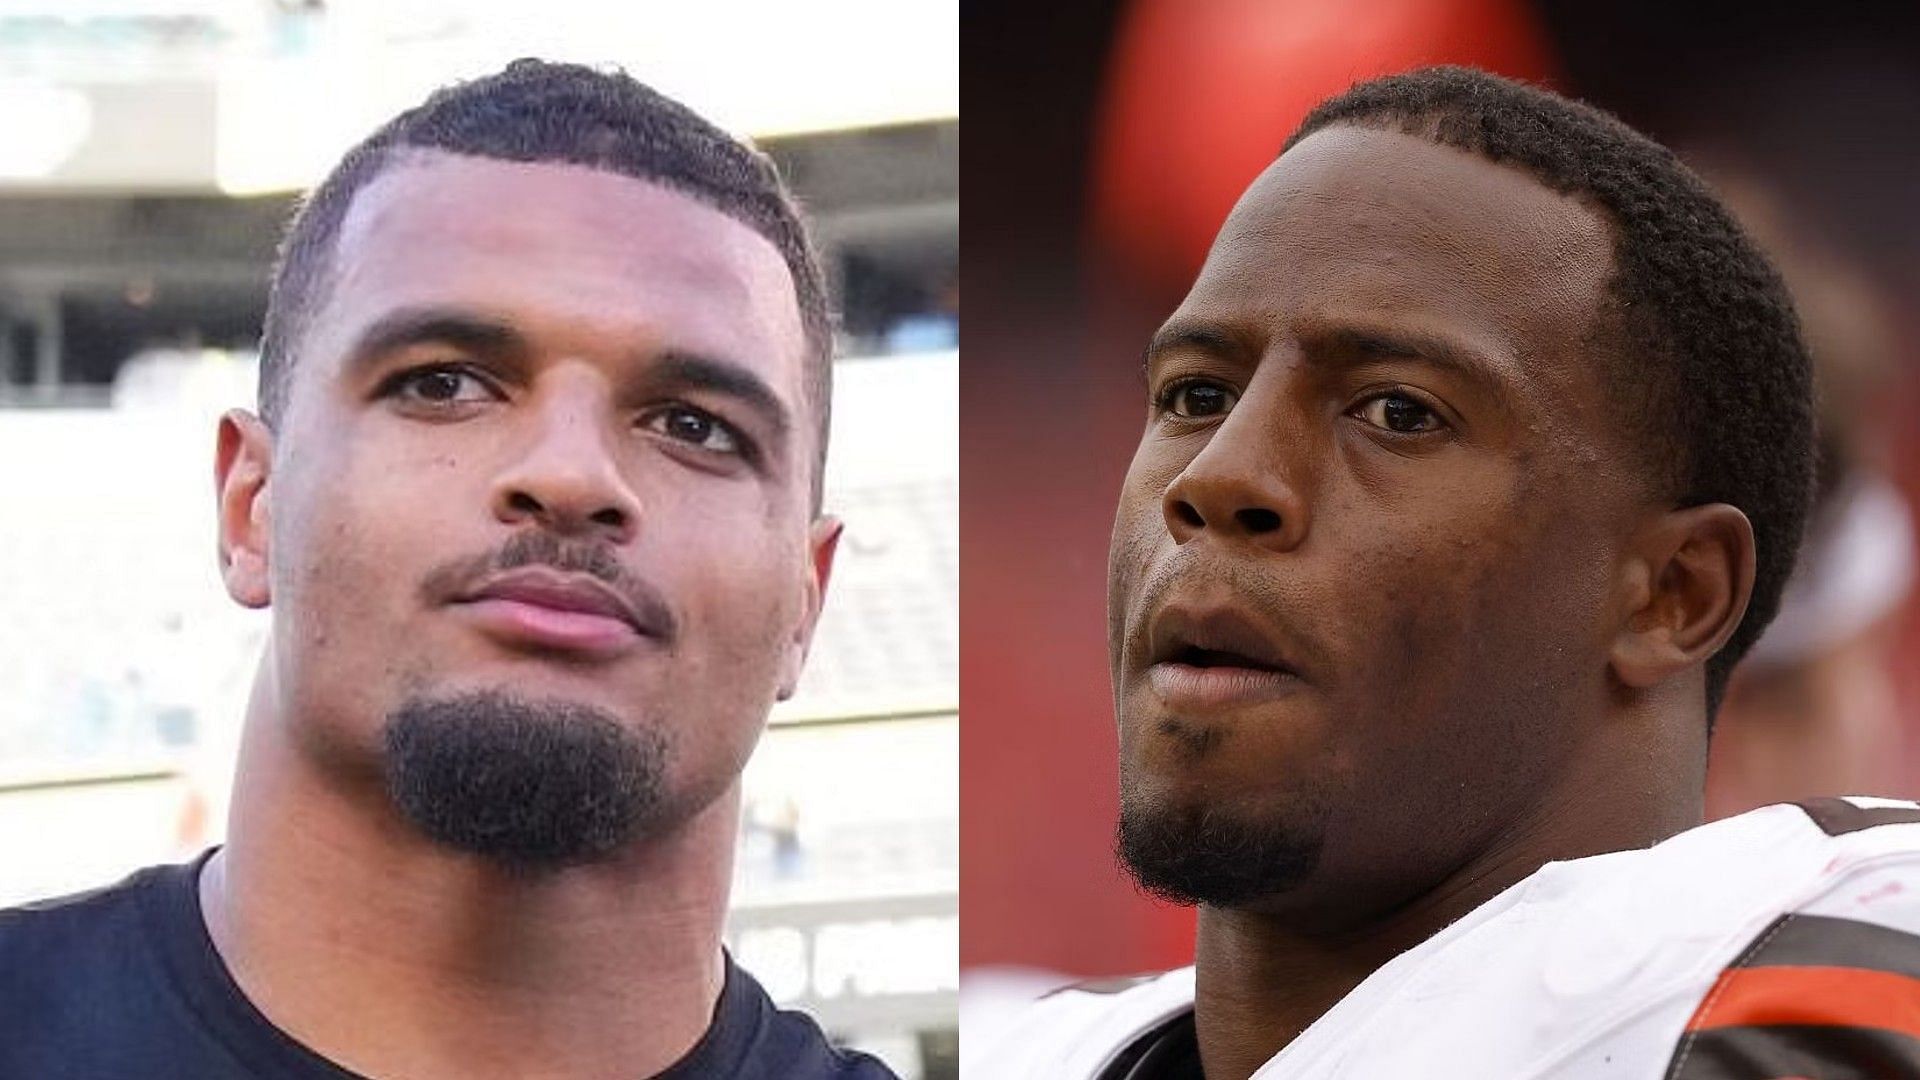 Minkah Fitzpatrick in hot water with former NFL players as Nick Chubb comes to terms with traumatic injury